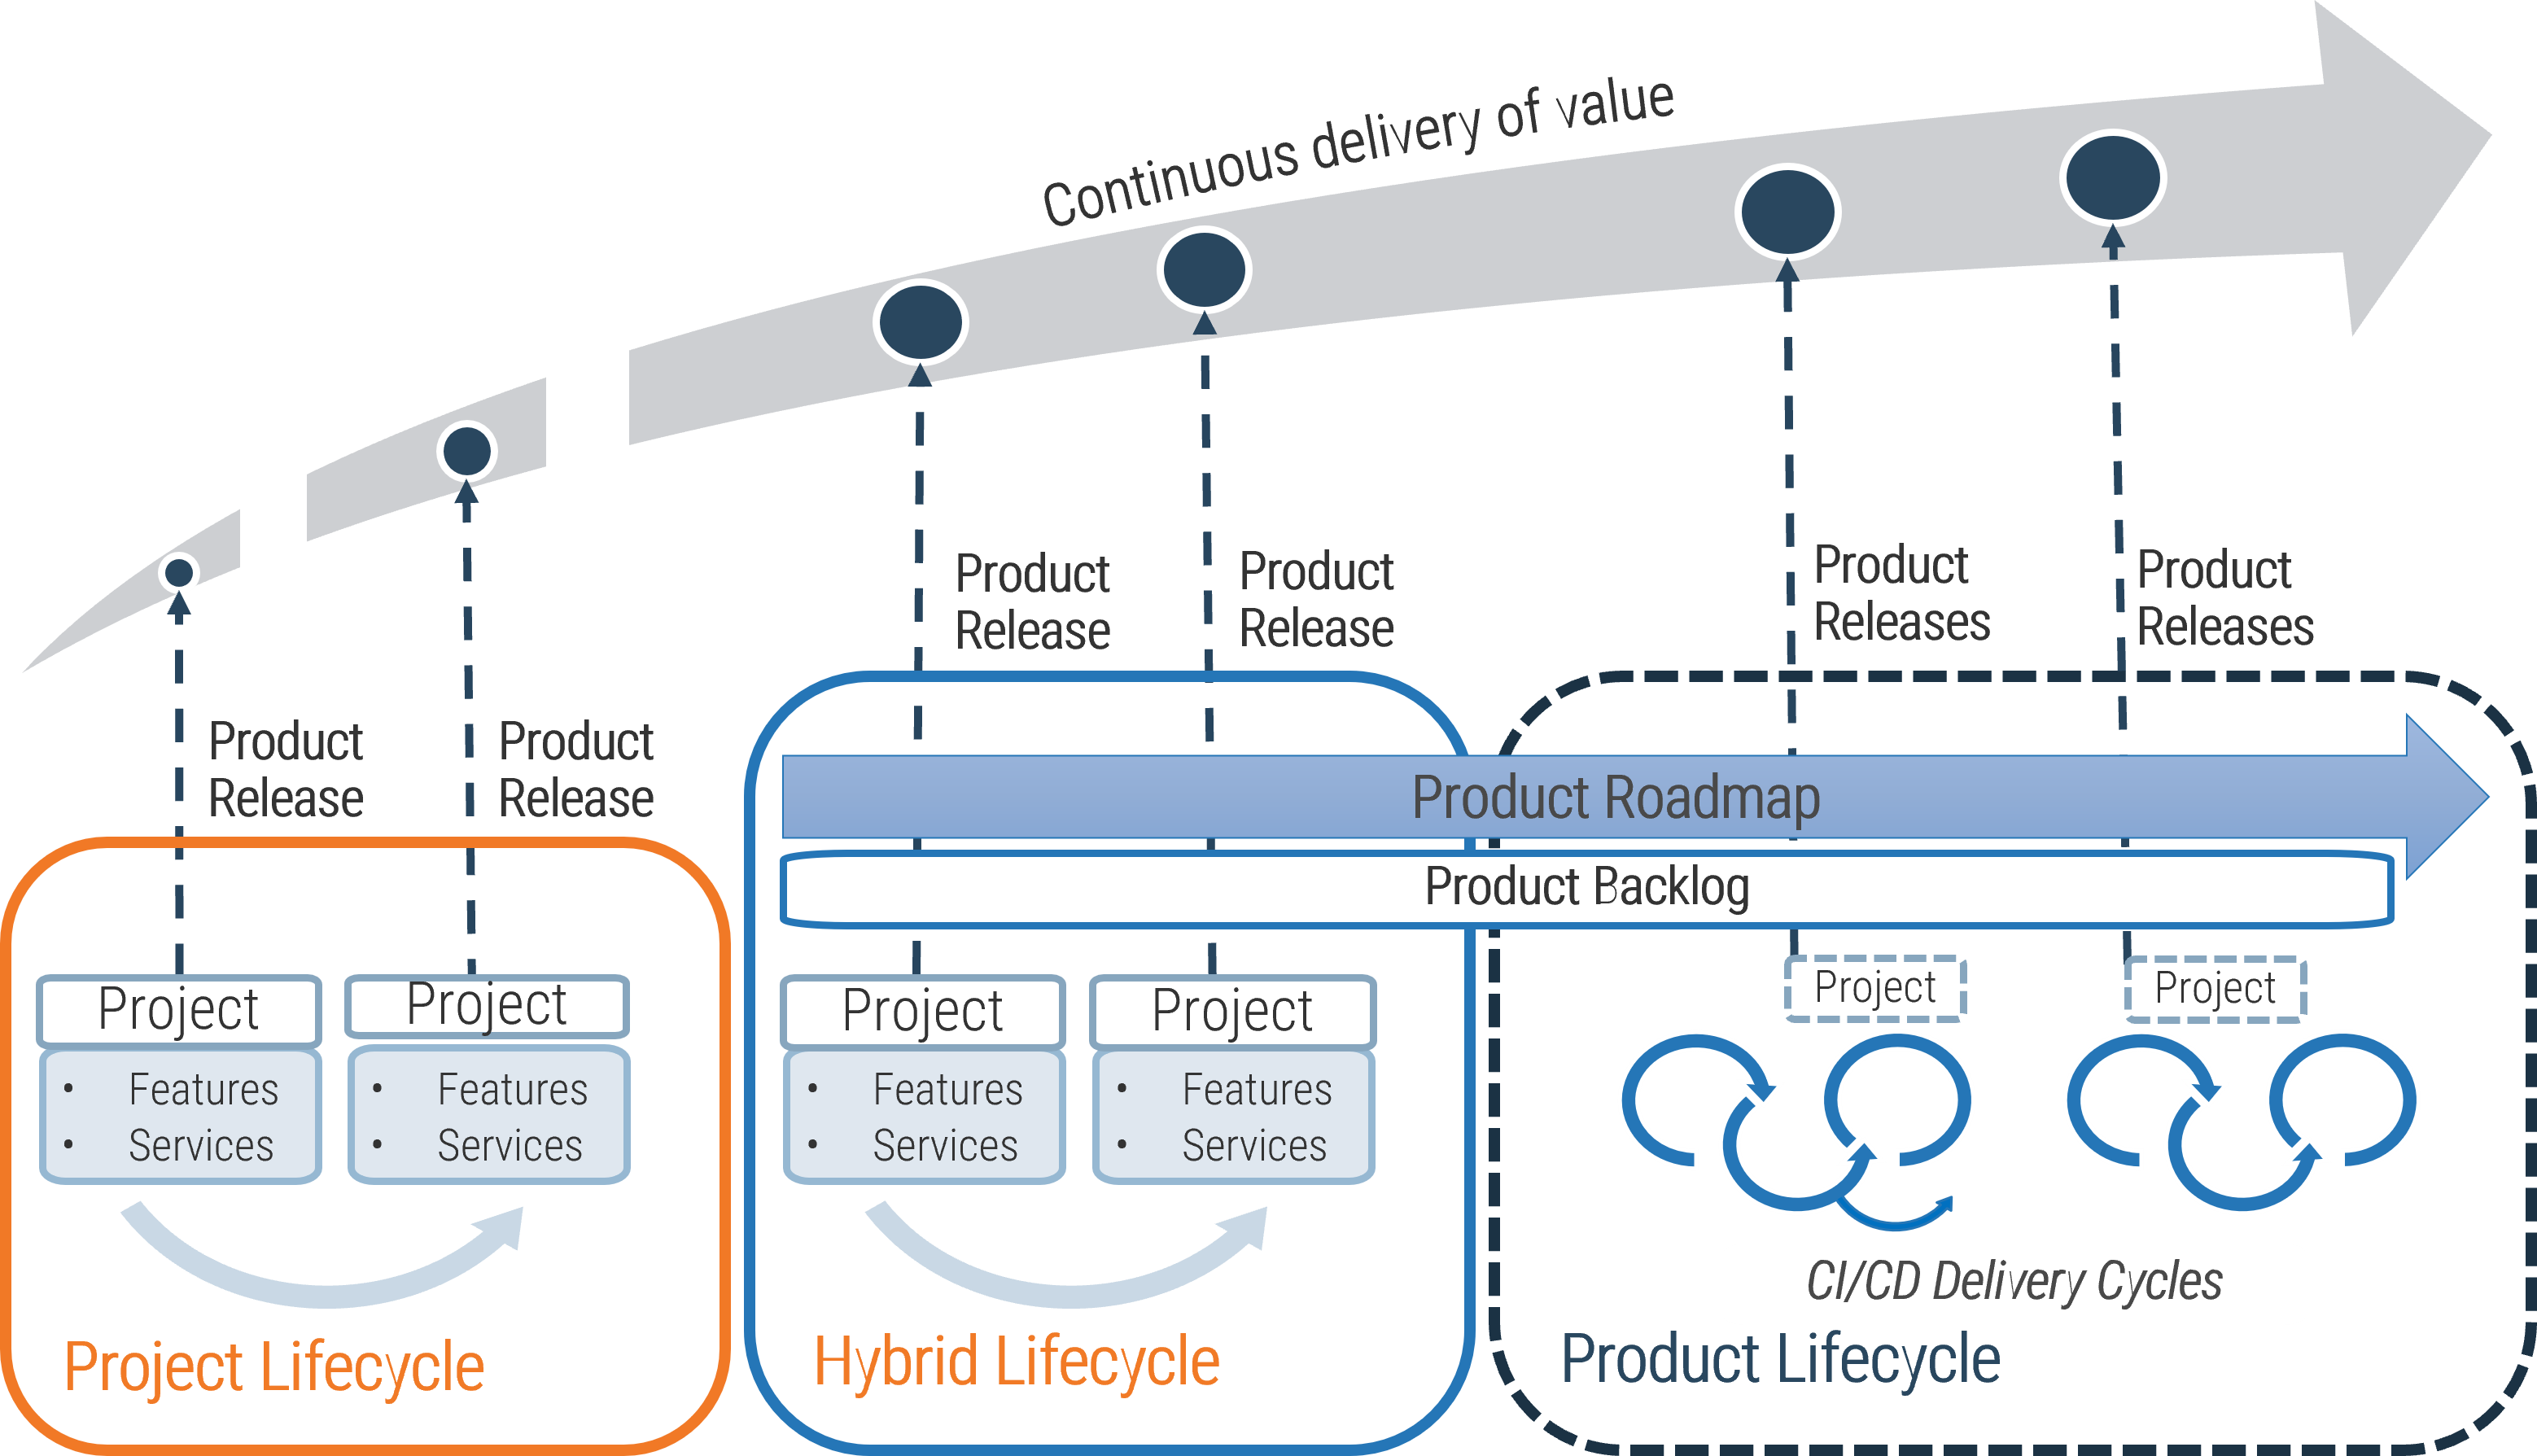 This is an image showing the relationship between the project lifecycle, a hybrid lifecycle, and a product lifecycle.